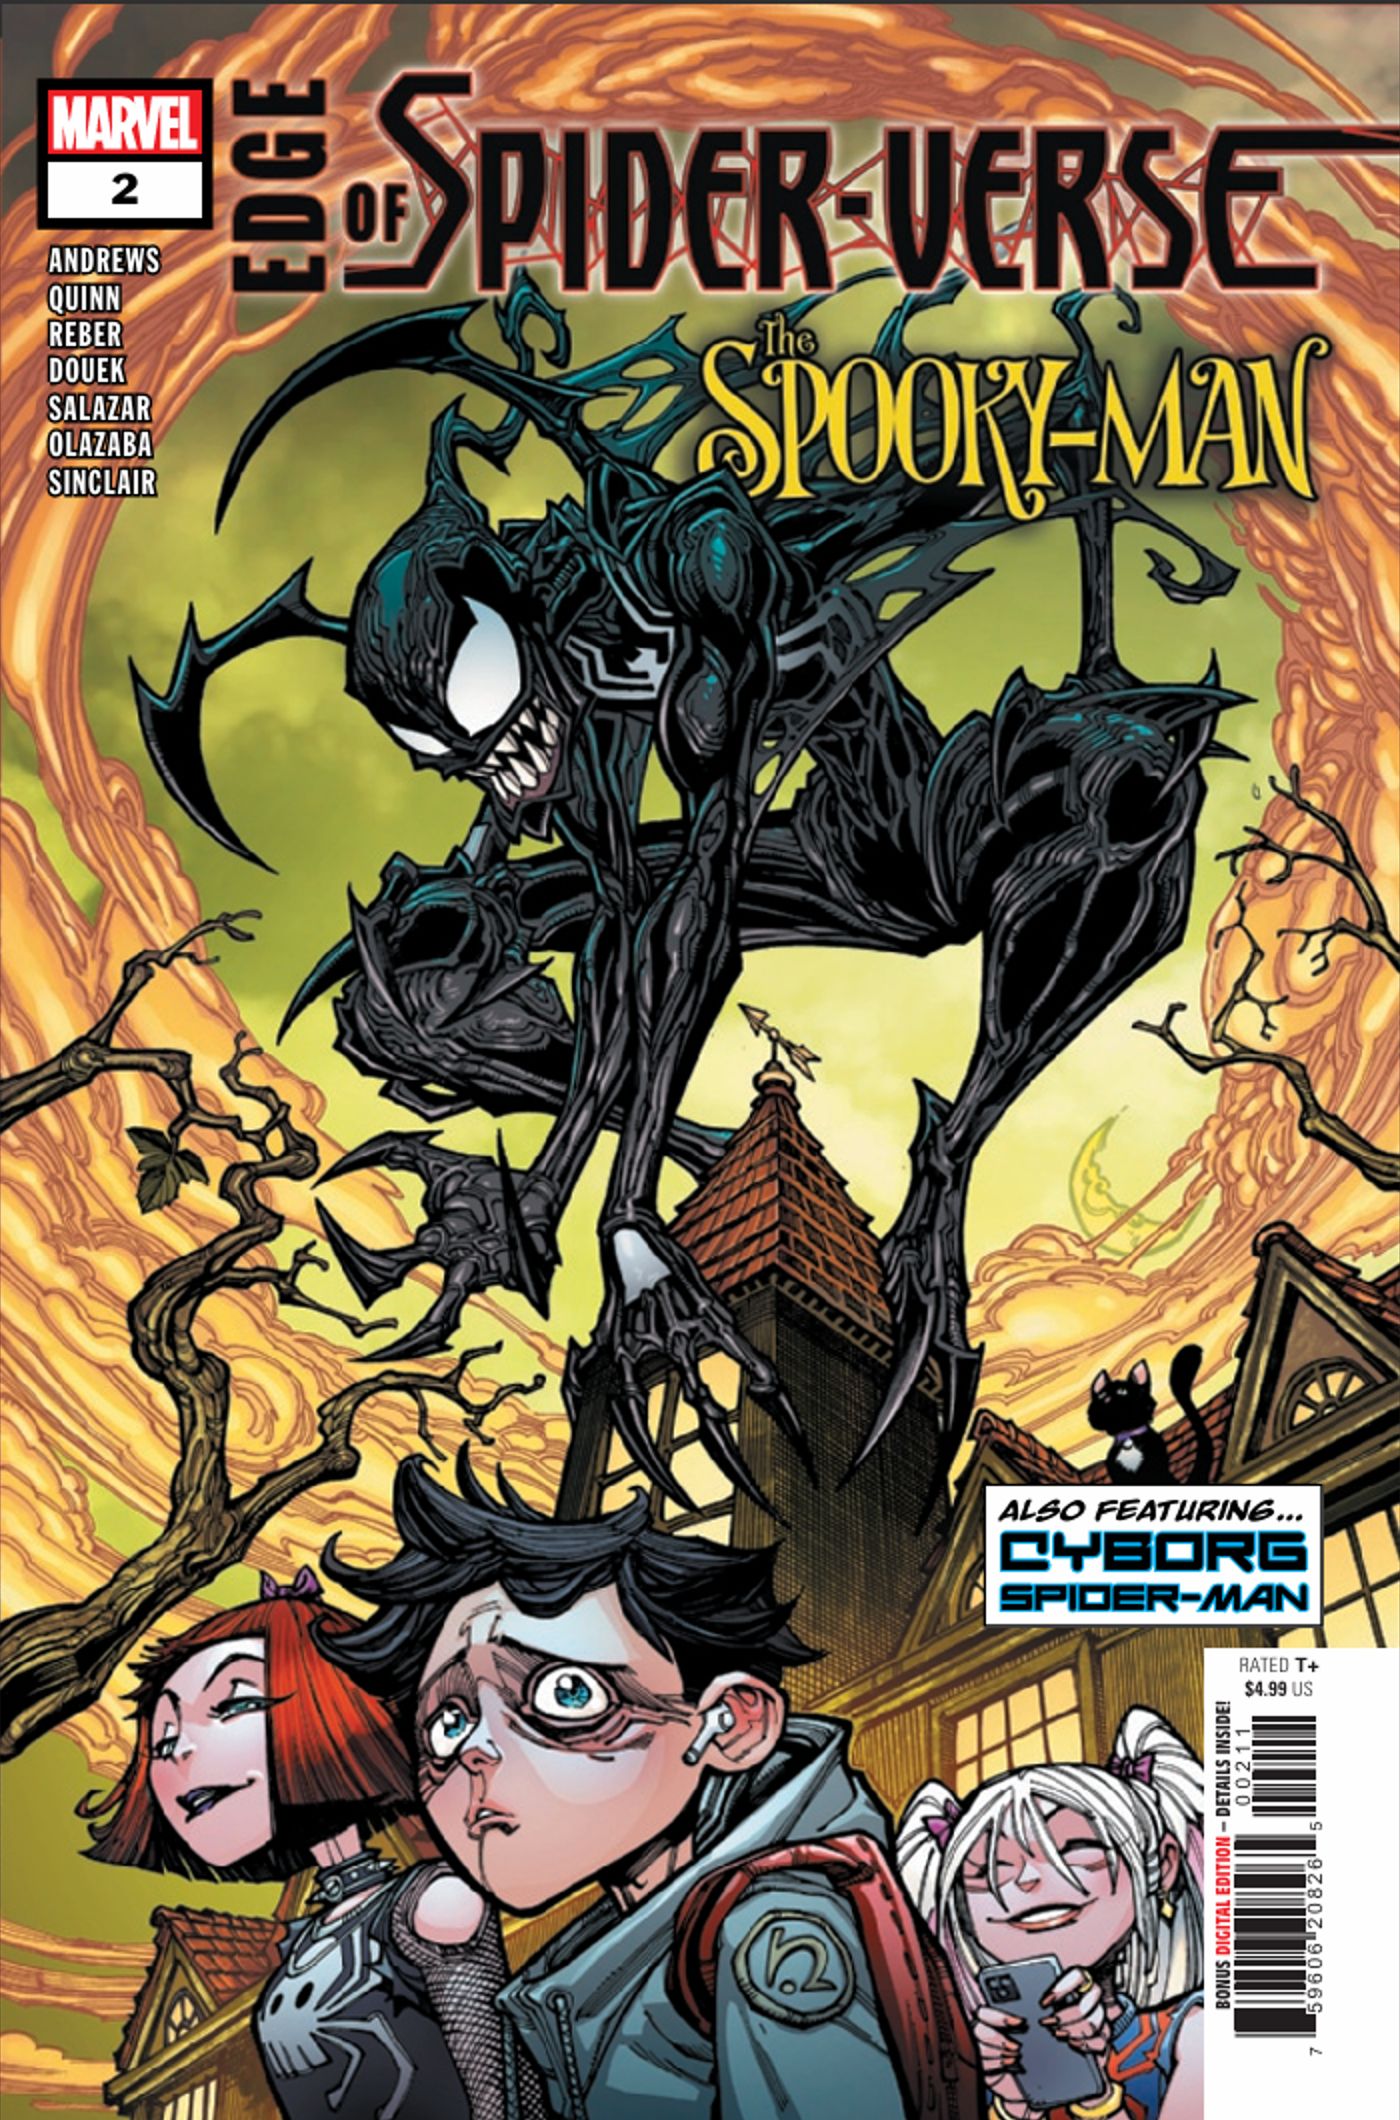 Edge of Spider-Verse #2 Cover Art Featuring Spooky-Man, Gluemy and Sailor